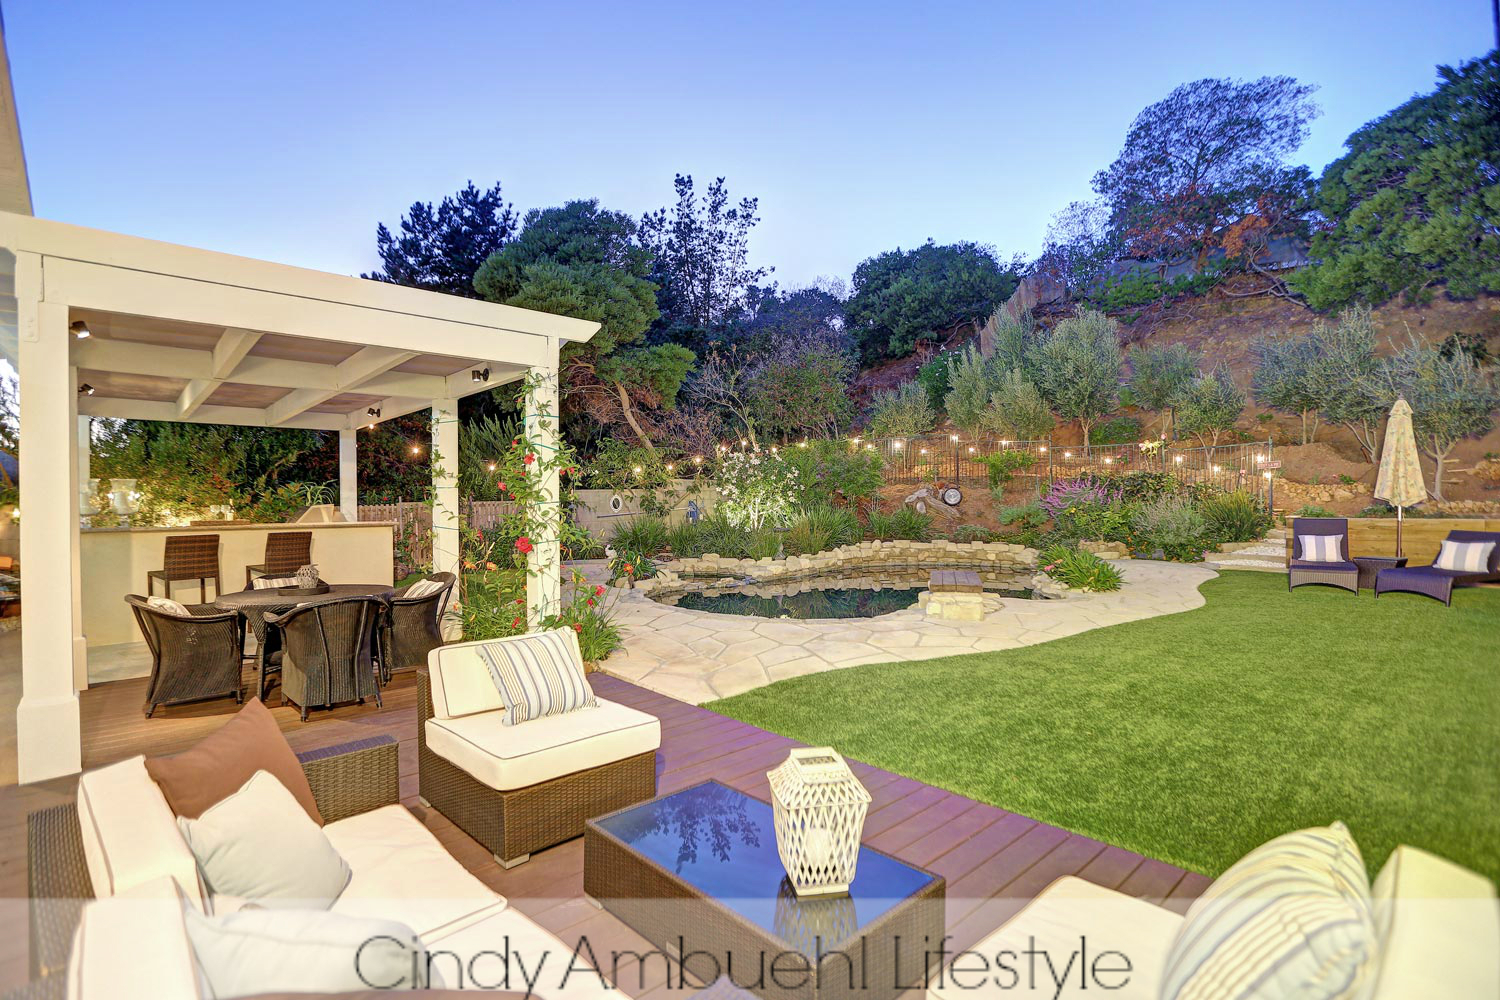 Inspiring Outdoor Spaces with Cindy Ambuehl